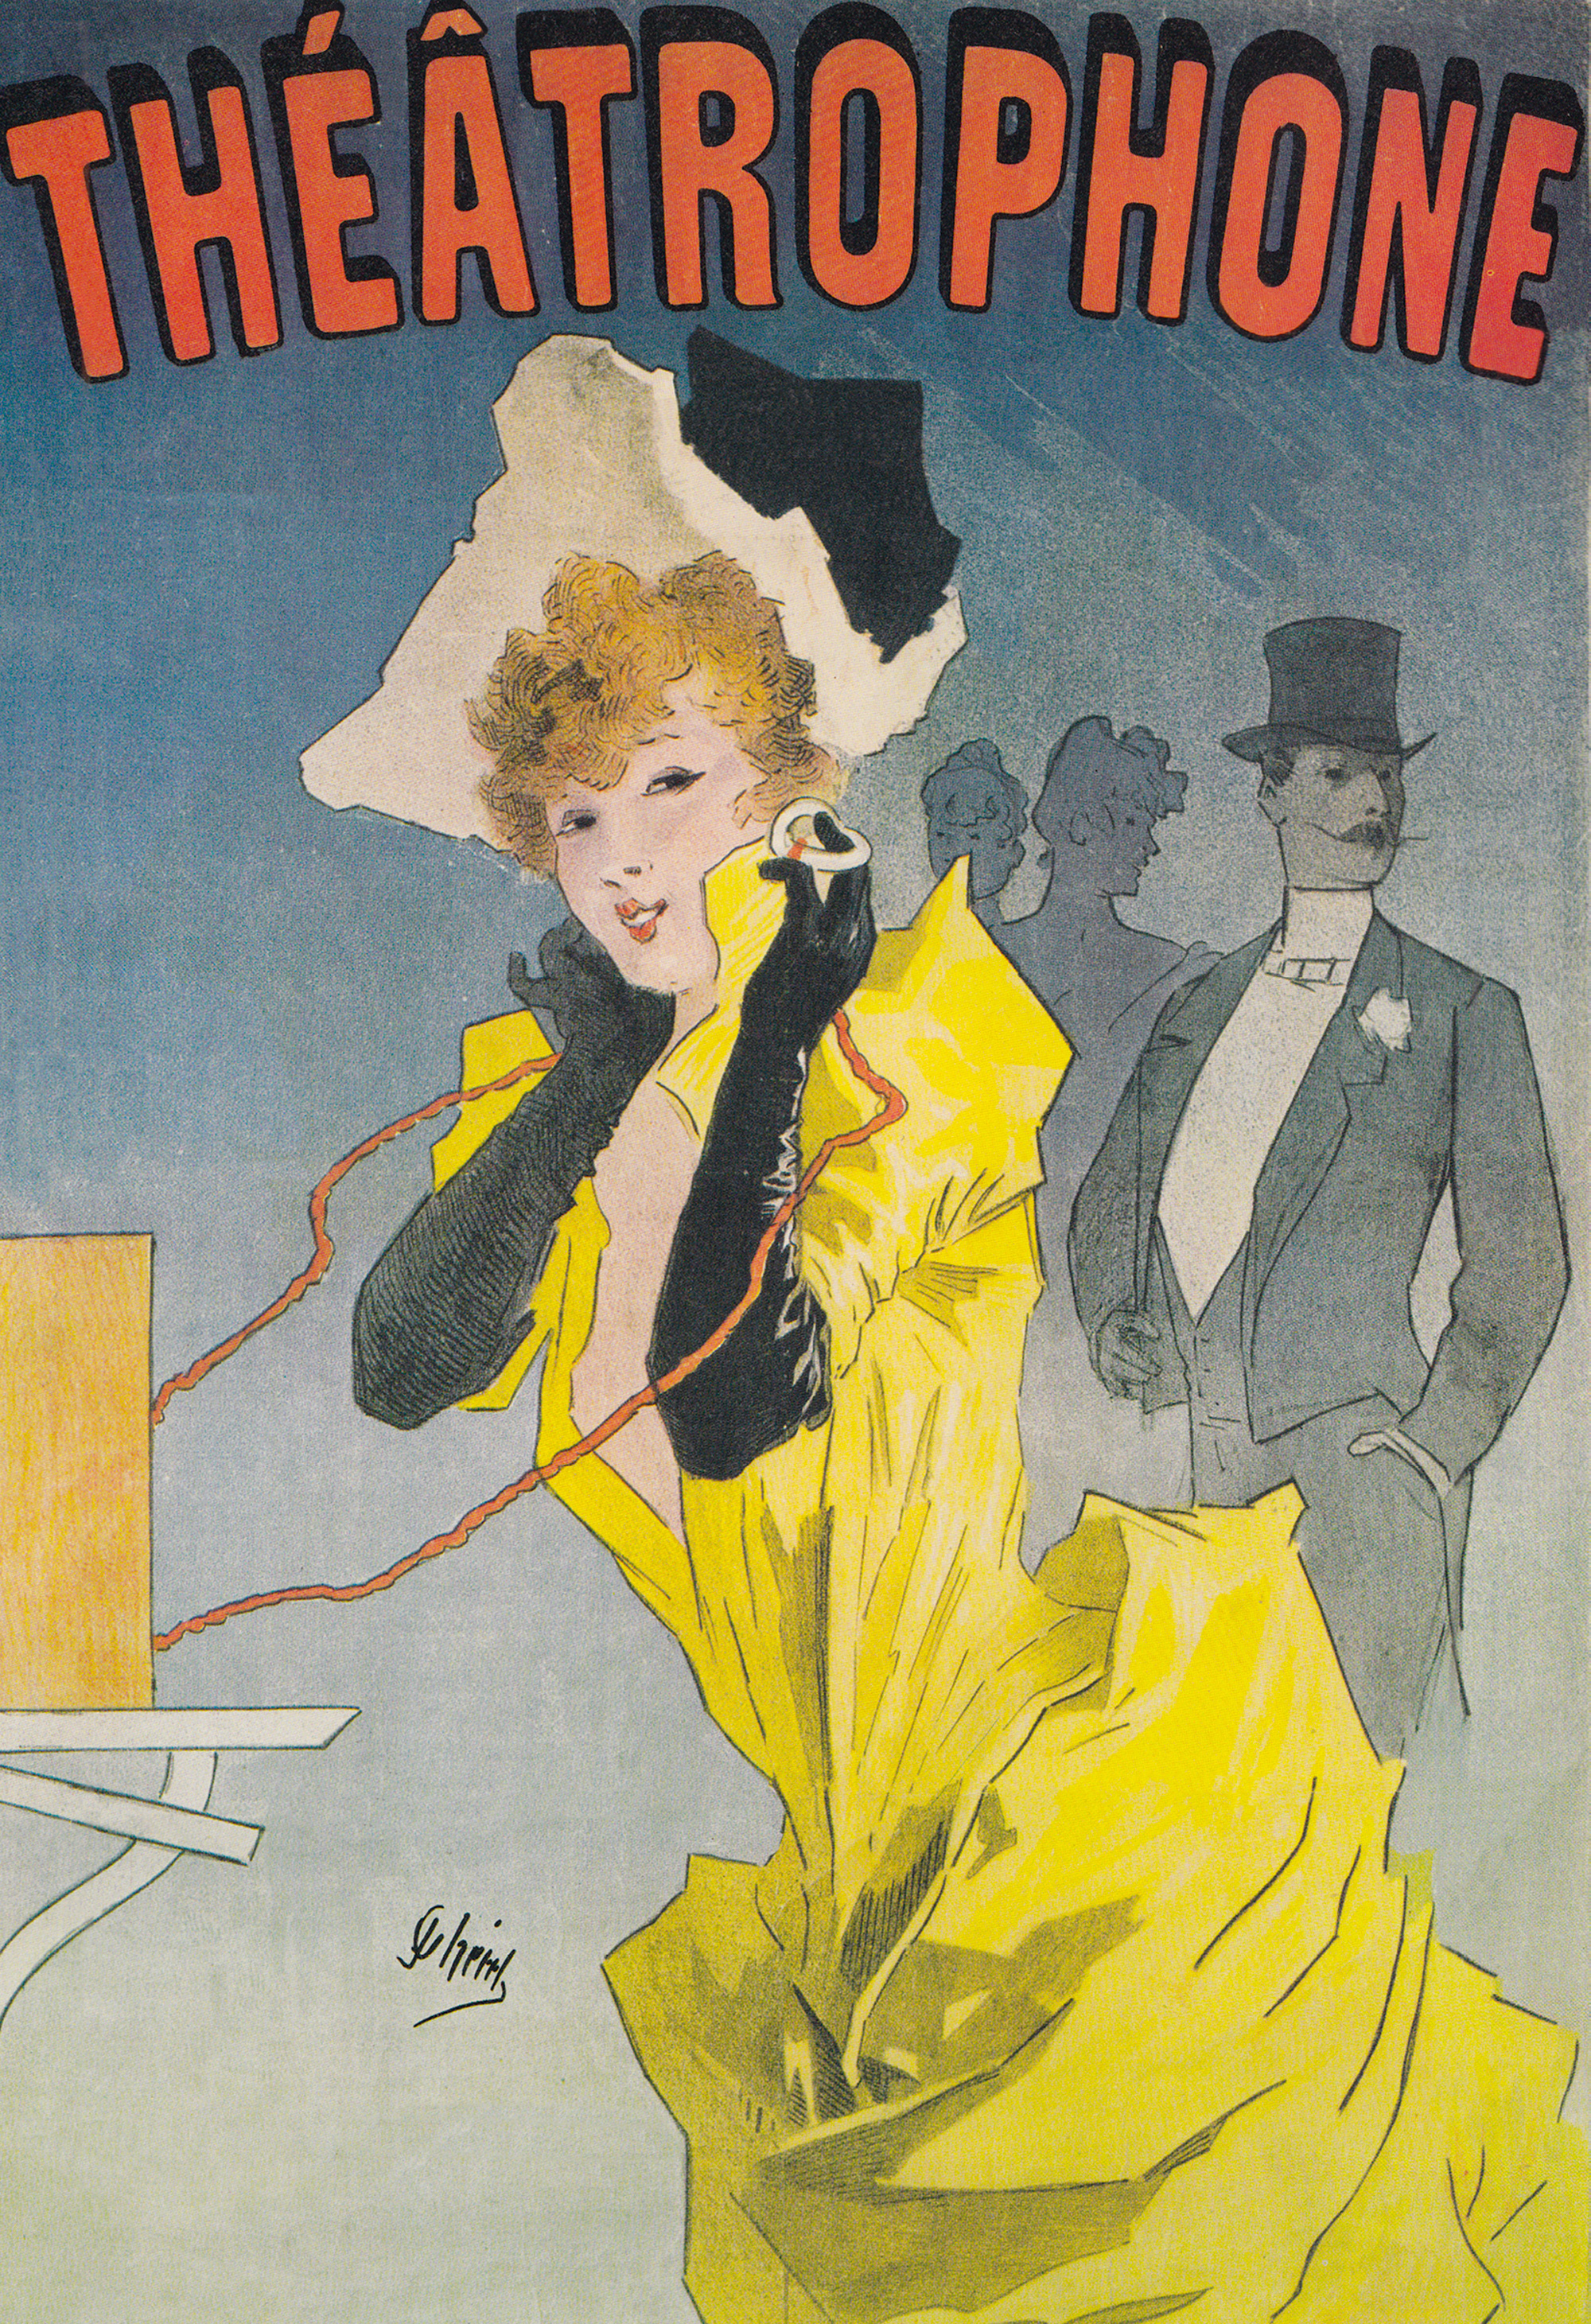 Jules Cheret’s eighteen ninety poster for the launch of the new Compagnie du Théâtrophone, depicting a chic Parisian woman dialing a phone. 